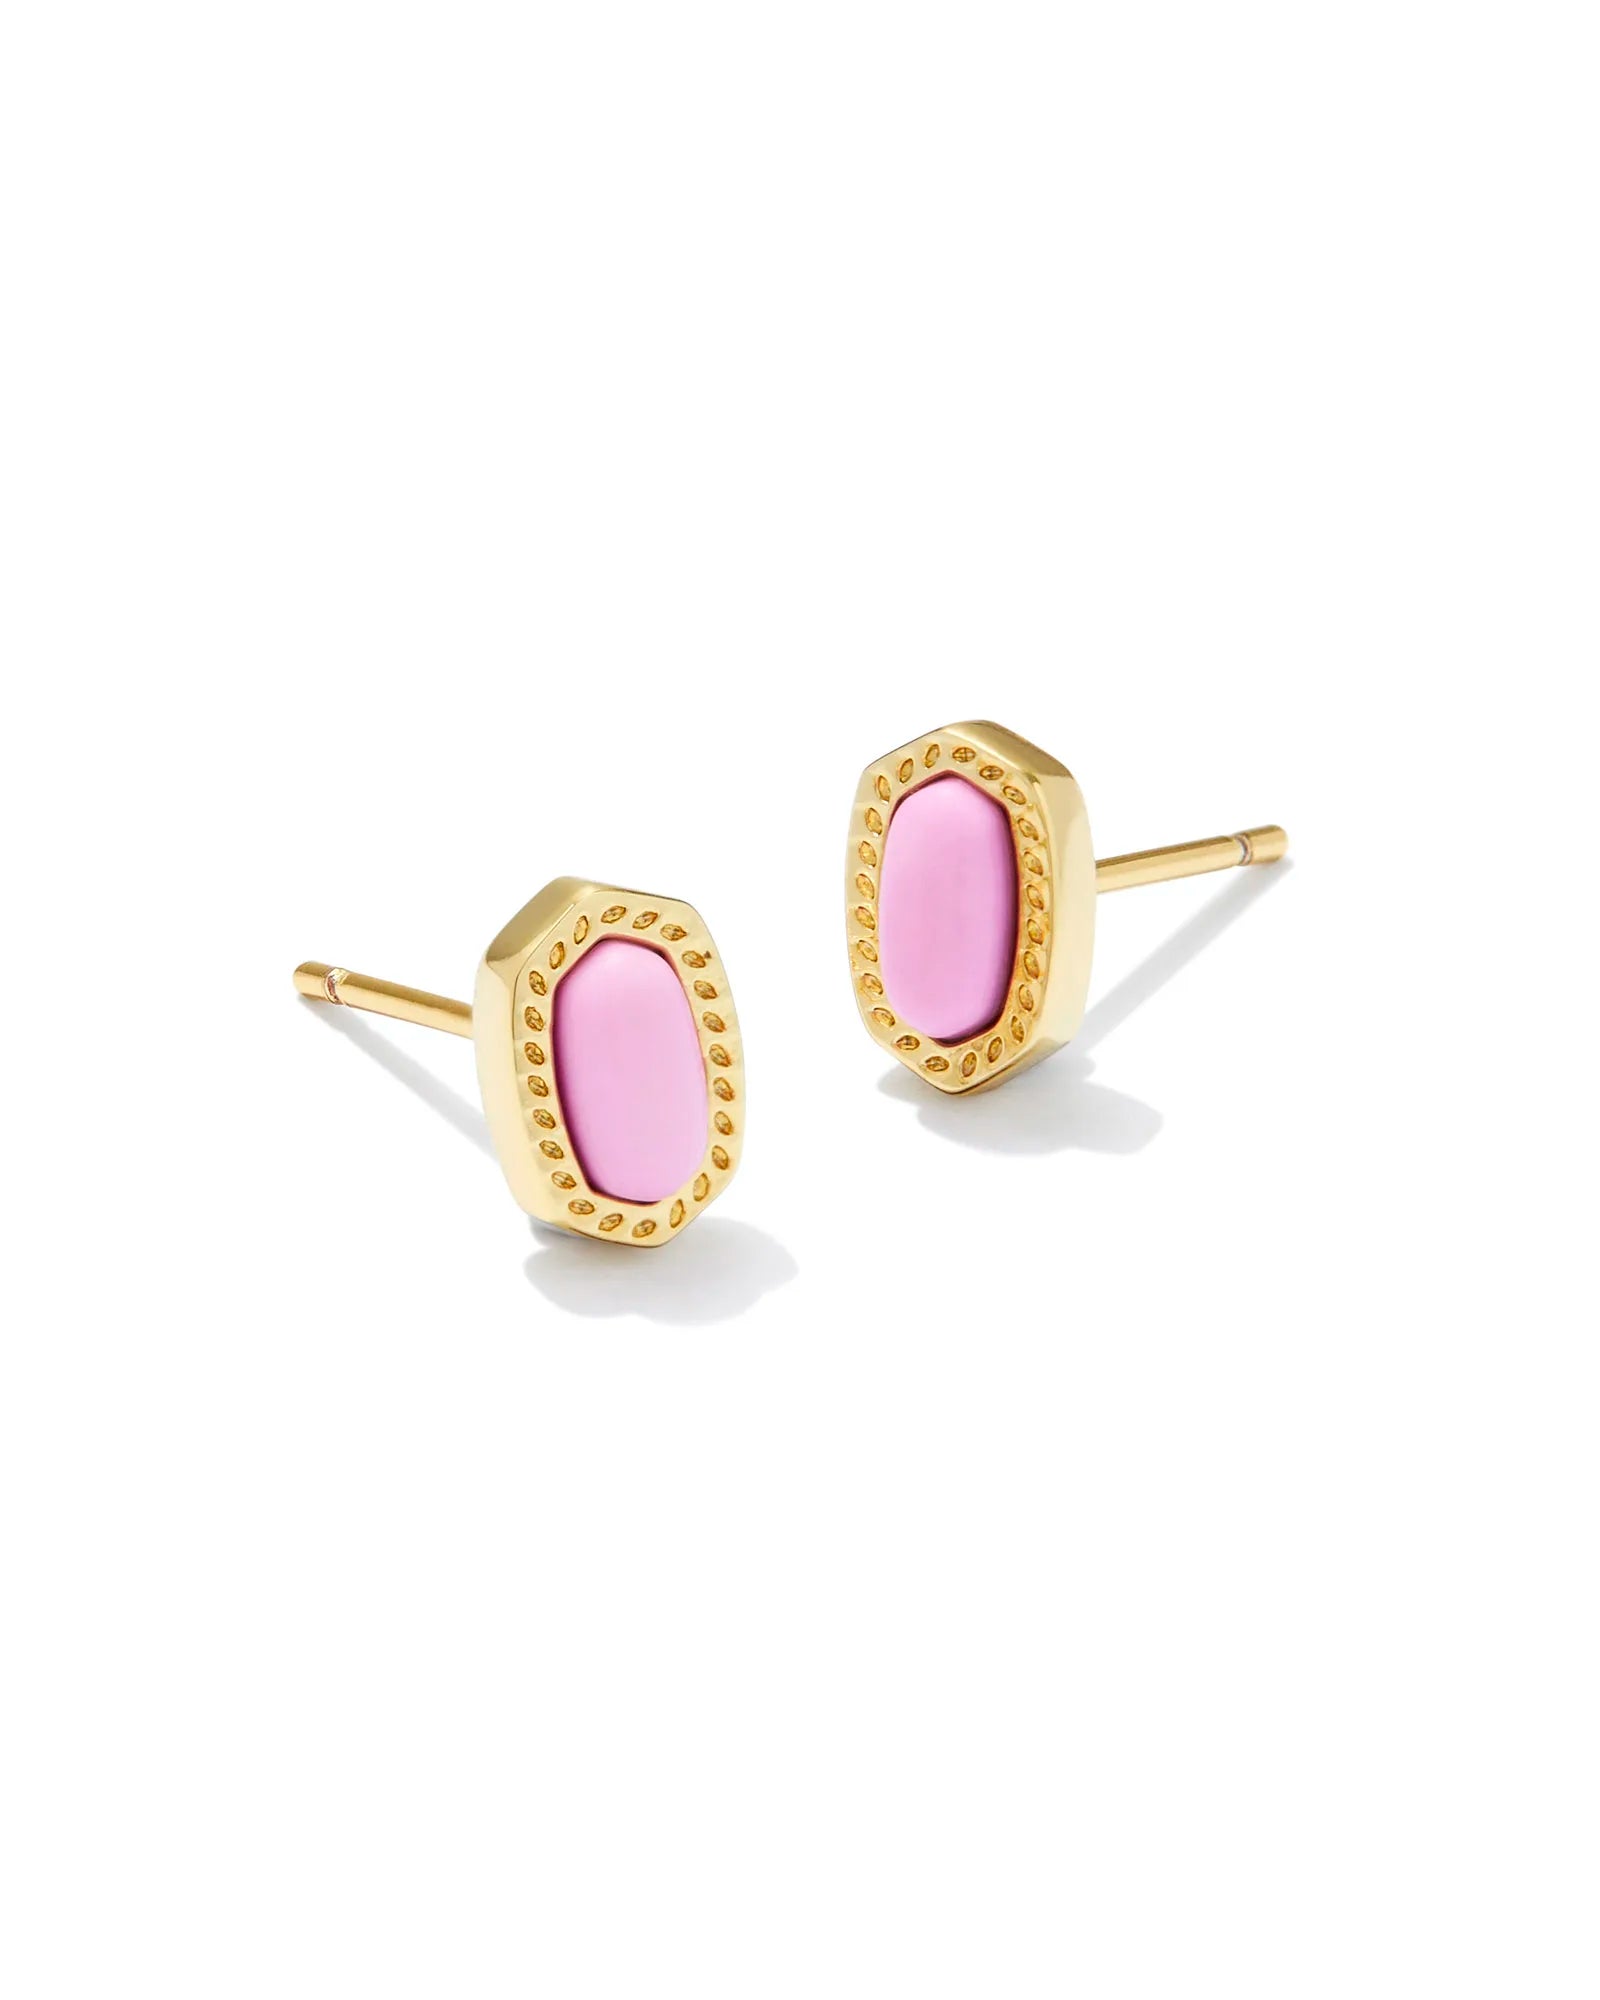 Kendra Scott | Mini Ellie Gold Stud Earrings in Fuchsia Magnesite - Giddy Up Glamour Boutique